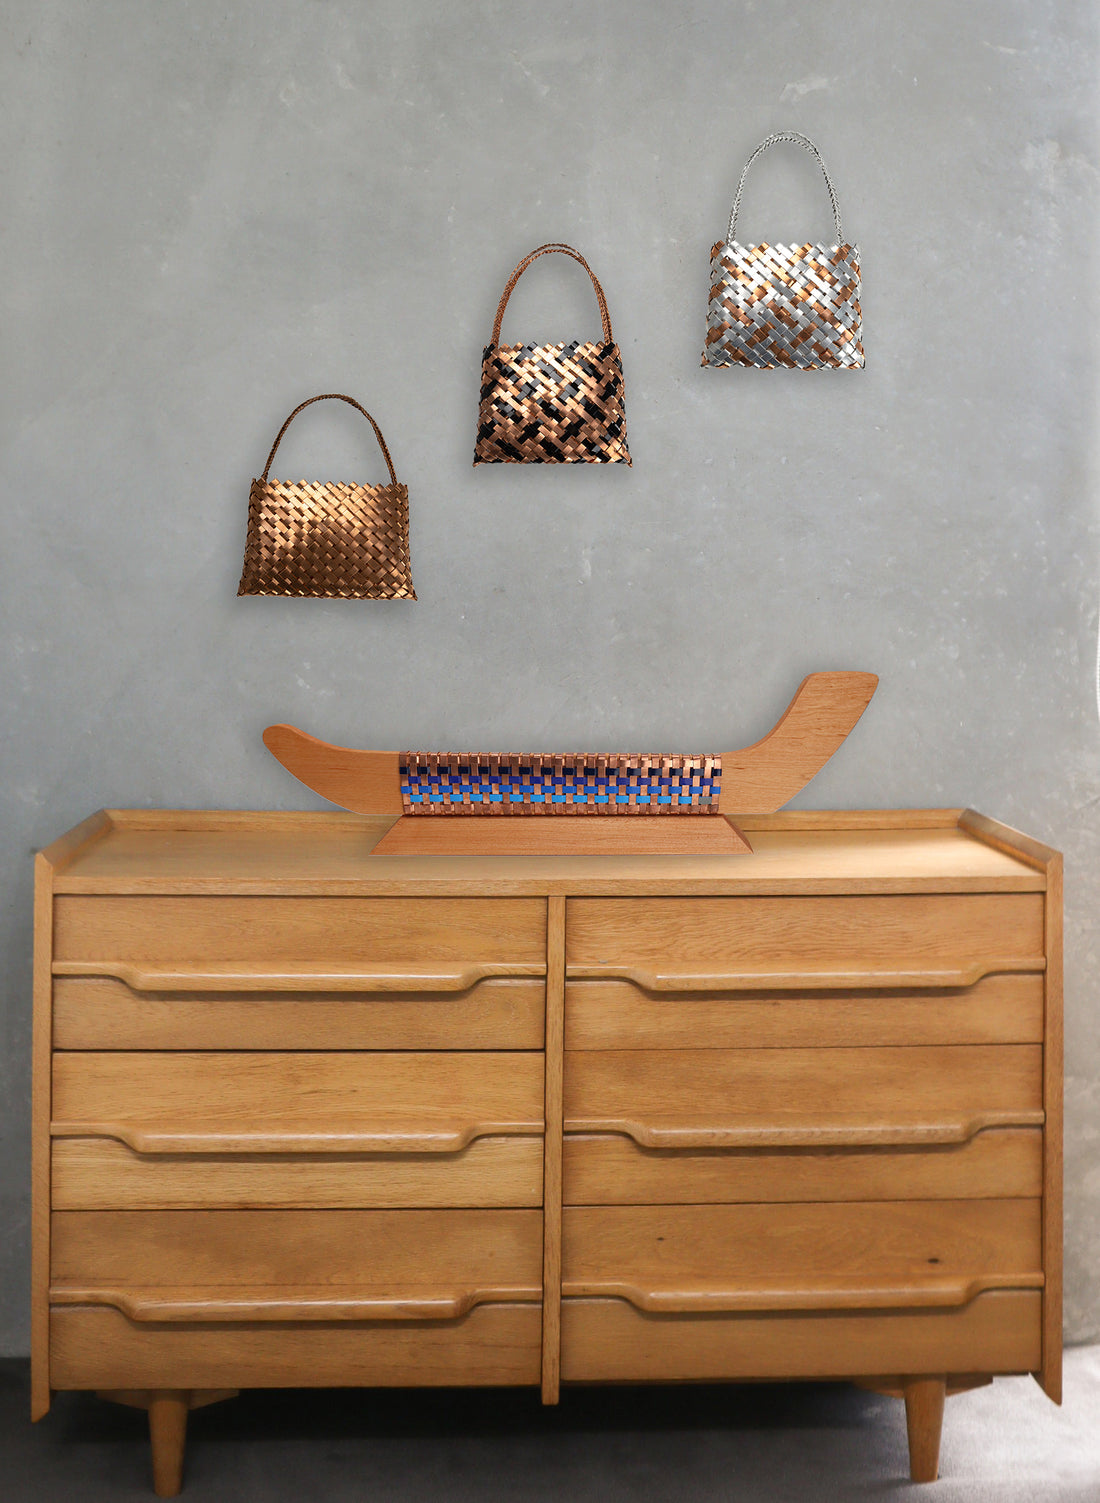 Copper And Black Kete (12 End)